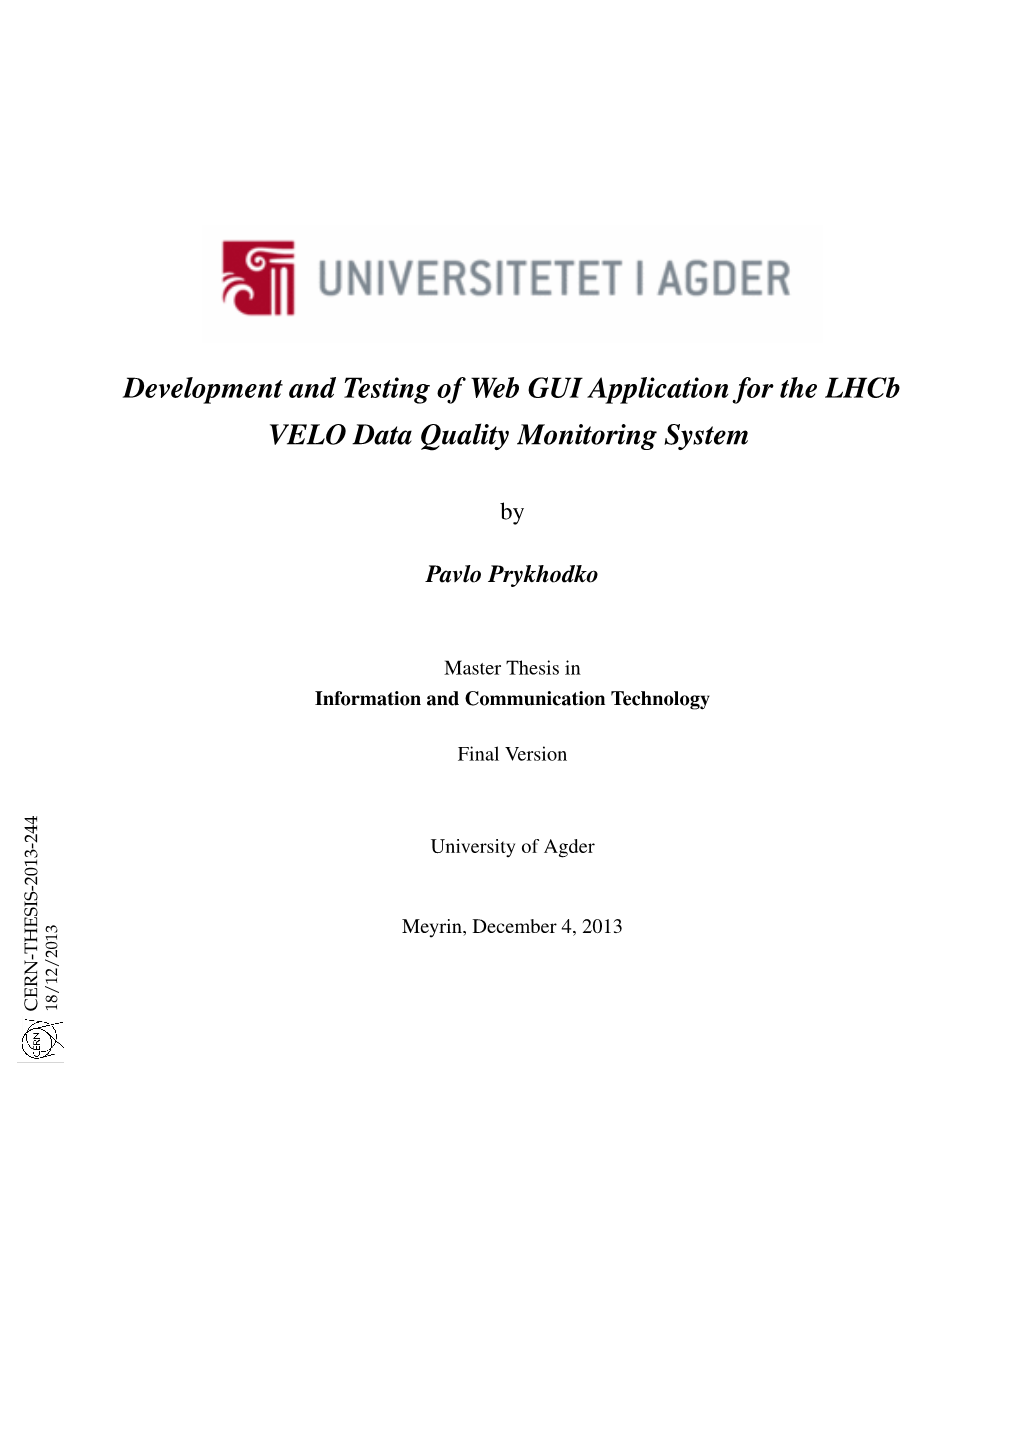 Development and Testing of Web GUI Application for the Lhcb VELO Data Quality Monitoring System